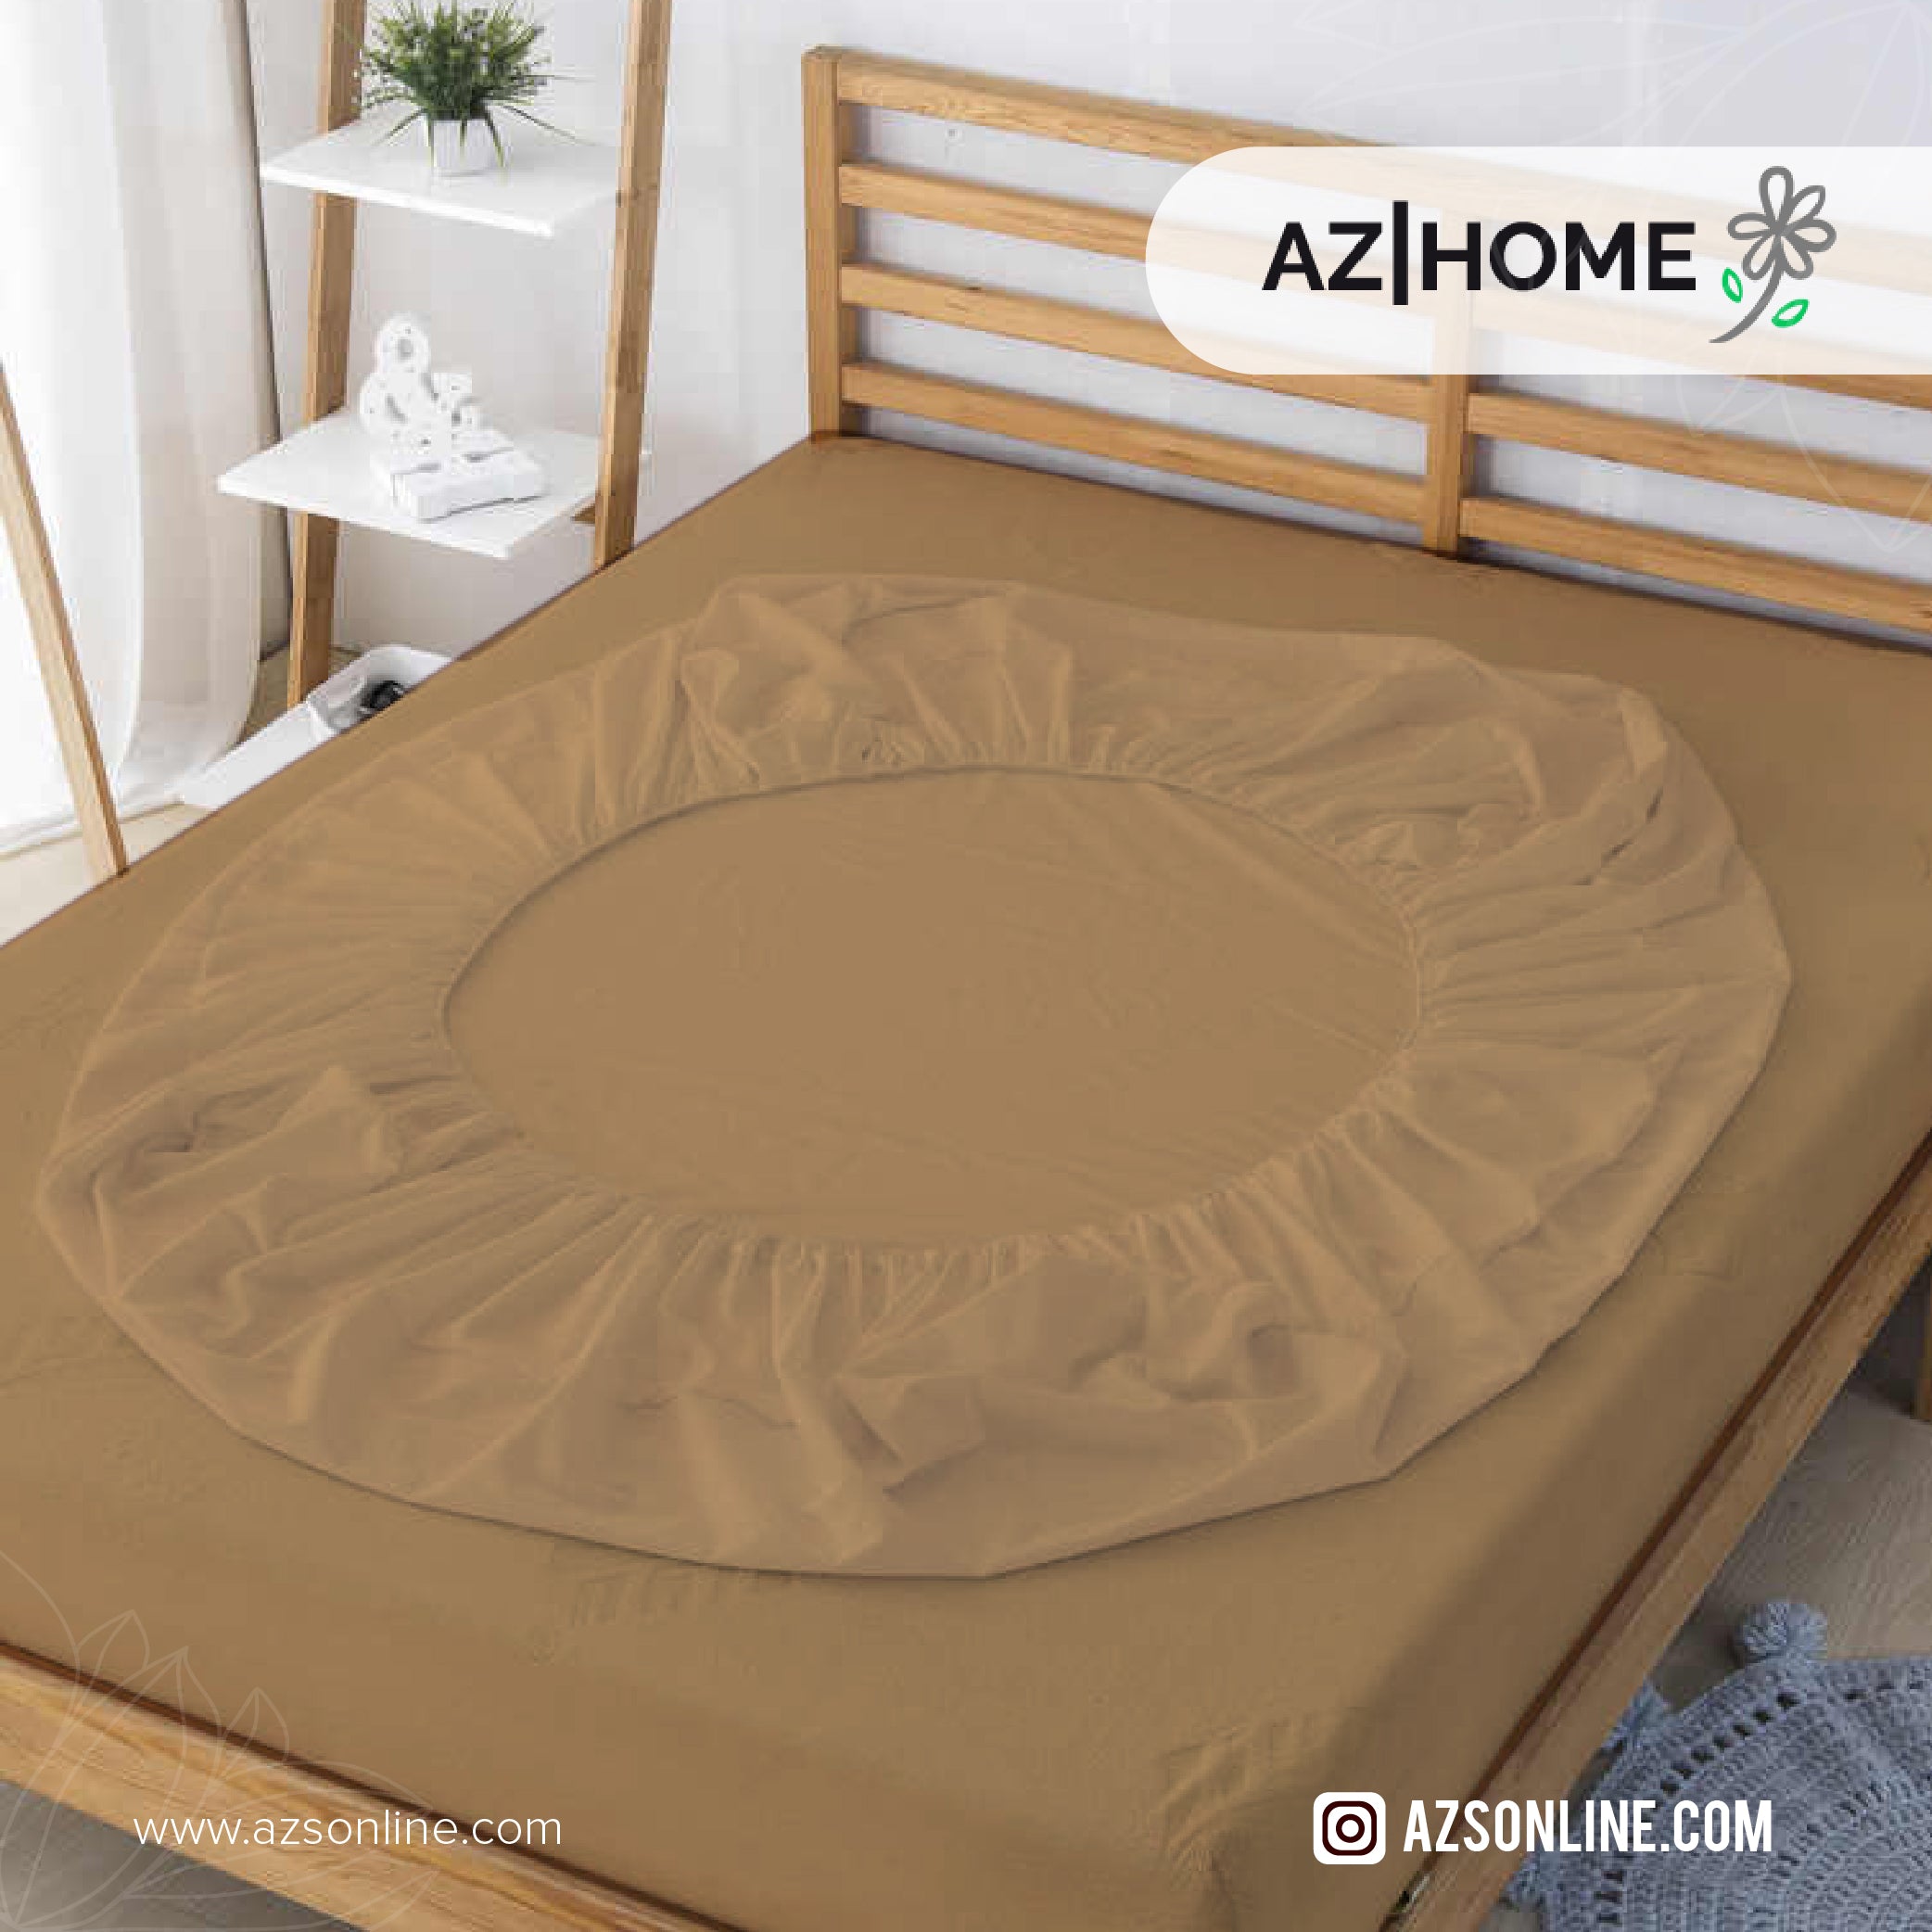 Water Proof Mattress Protector - Camel Brown